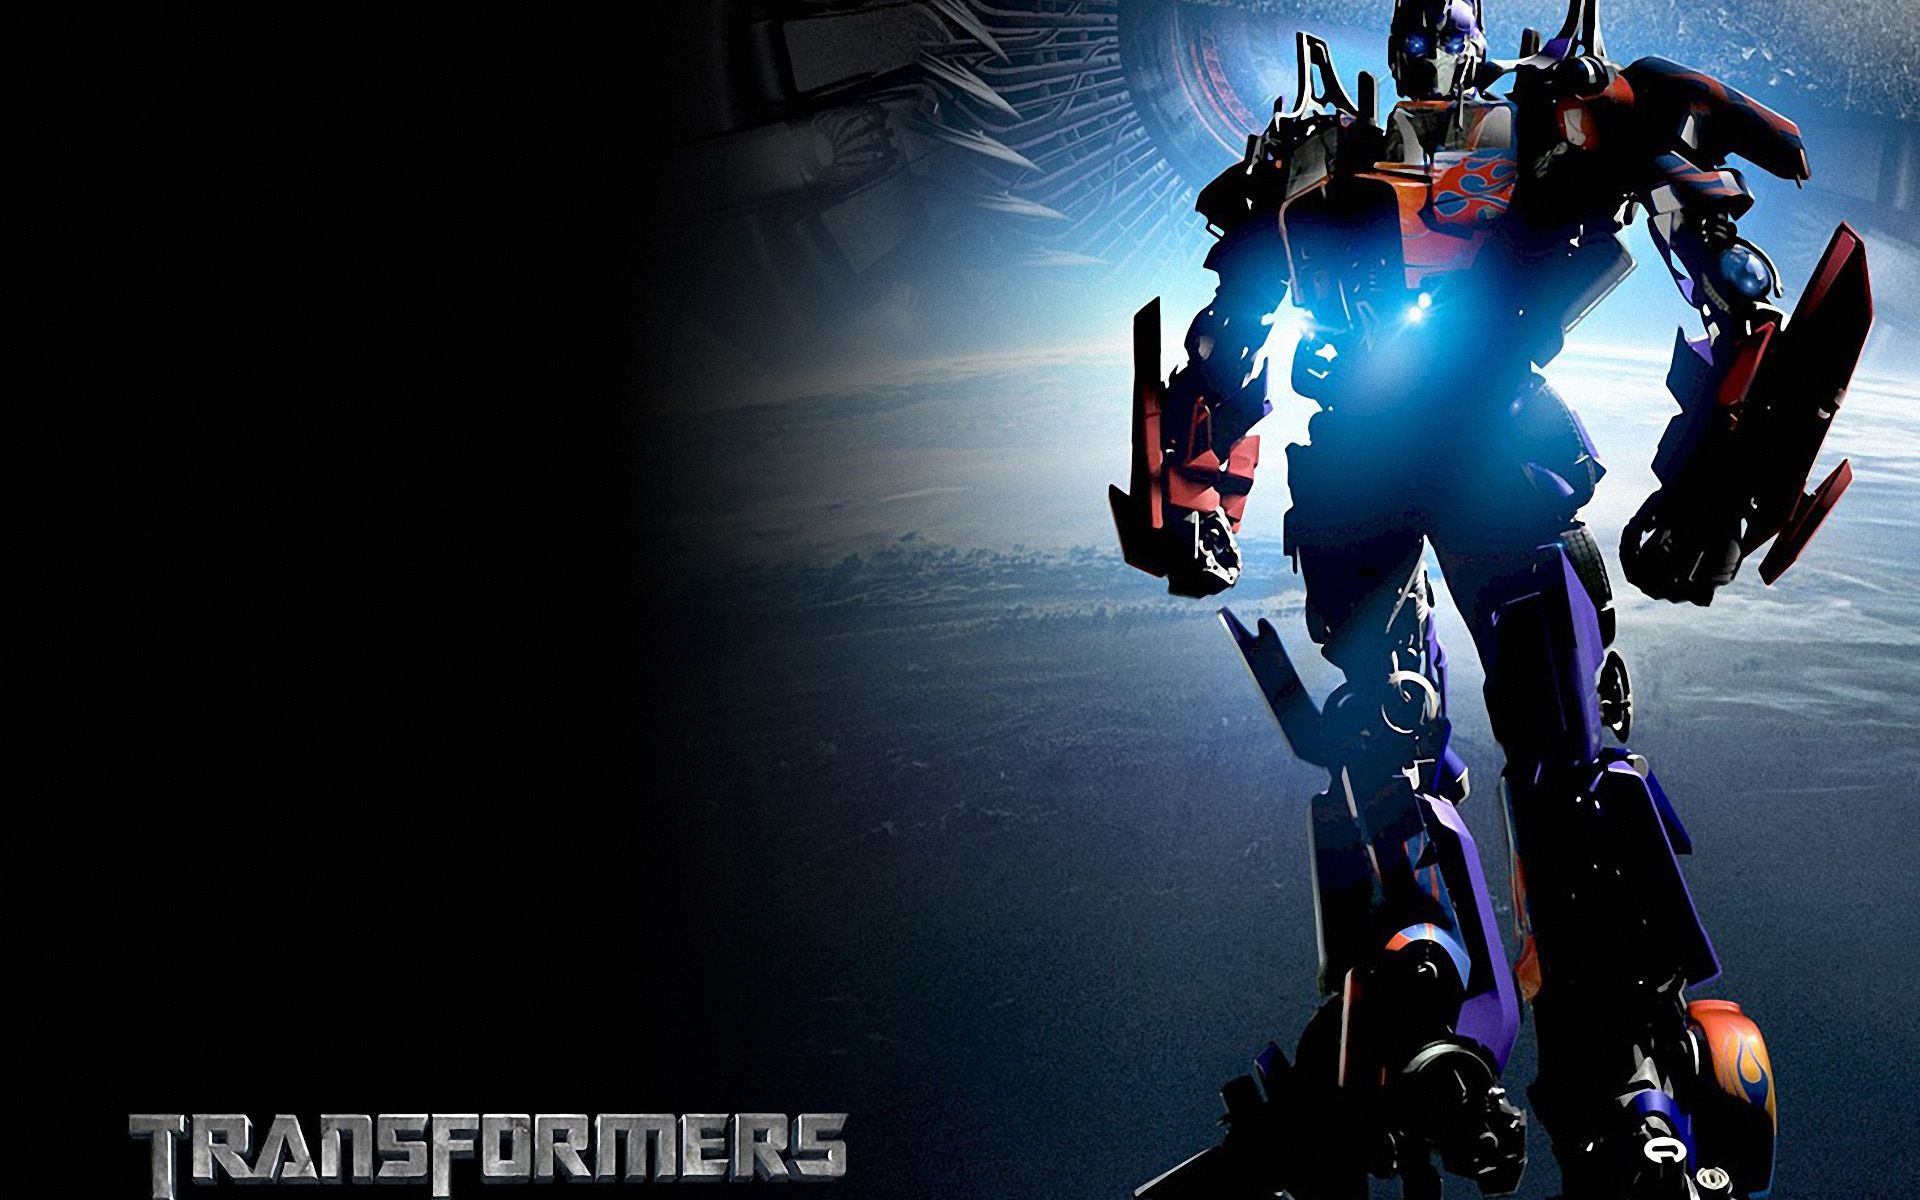 Transformers HD 1920x1200 Wallpapers, 1920x1200 Wallpapers